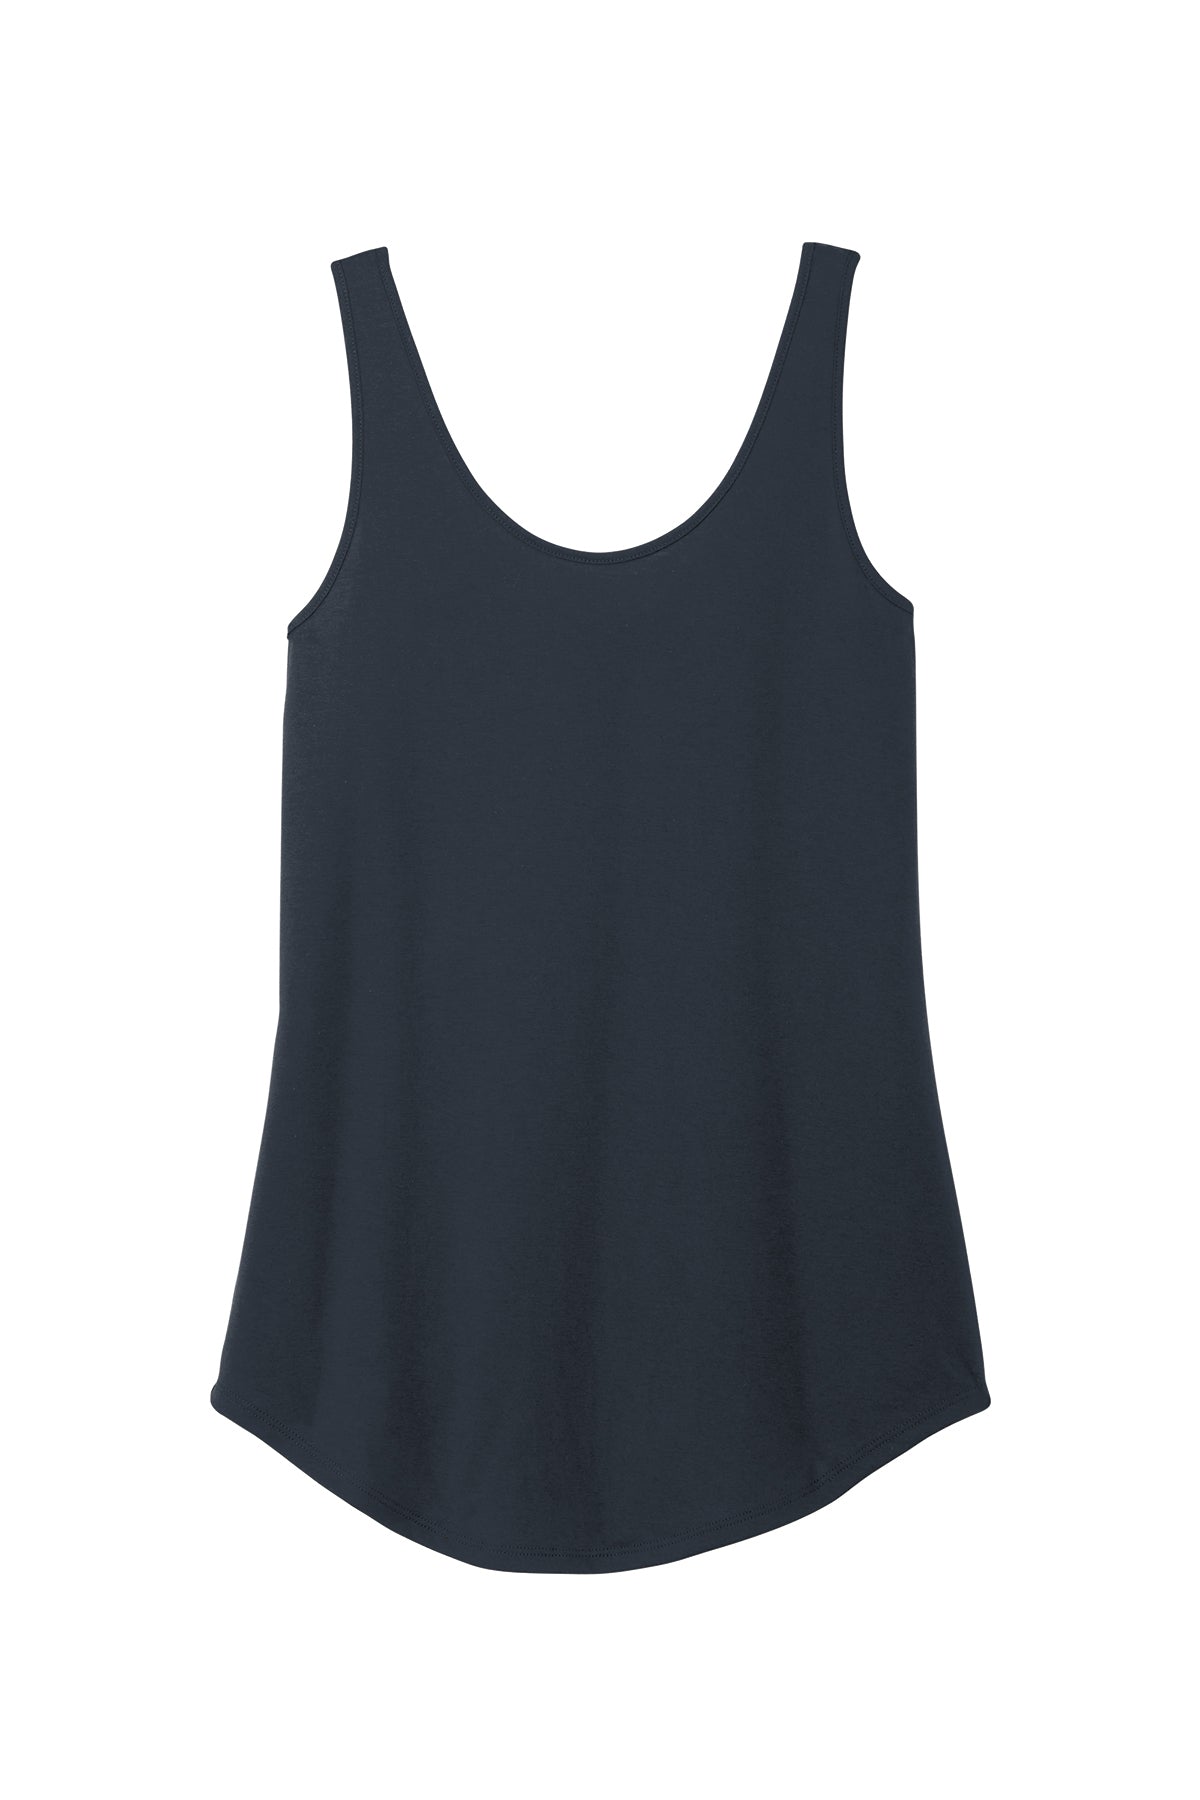 DT151 District Women’s Perfect Tri Relaxed Tank